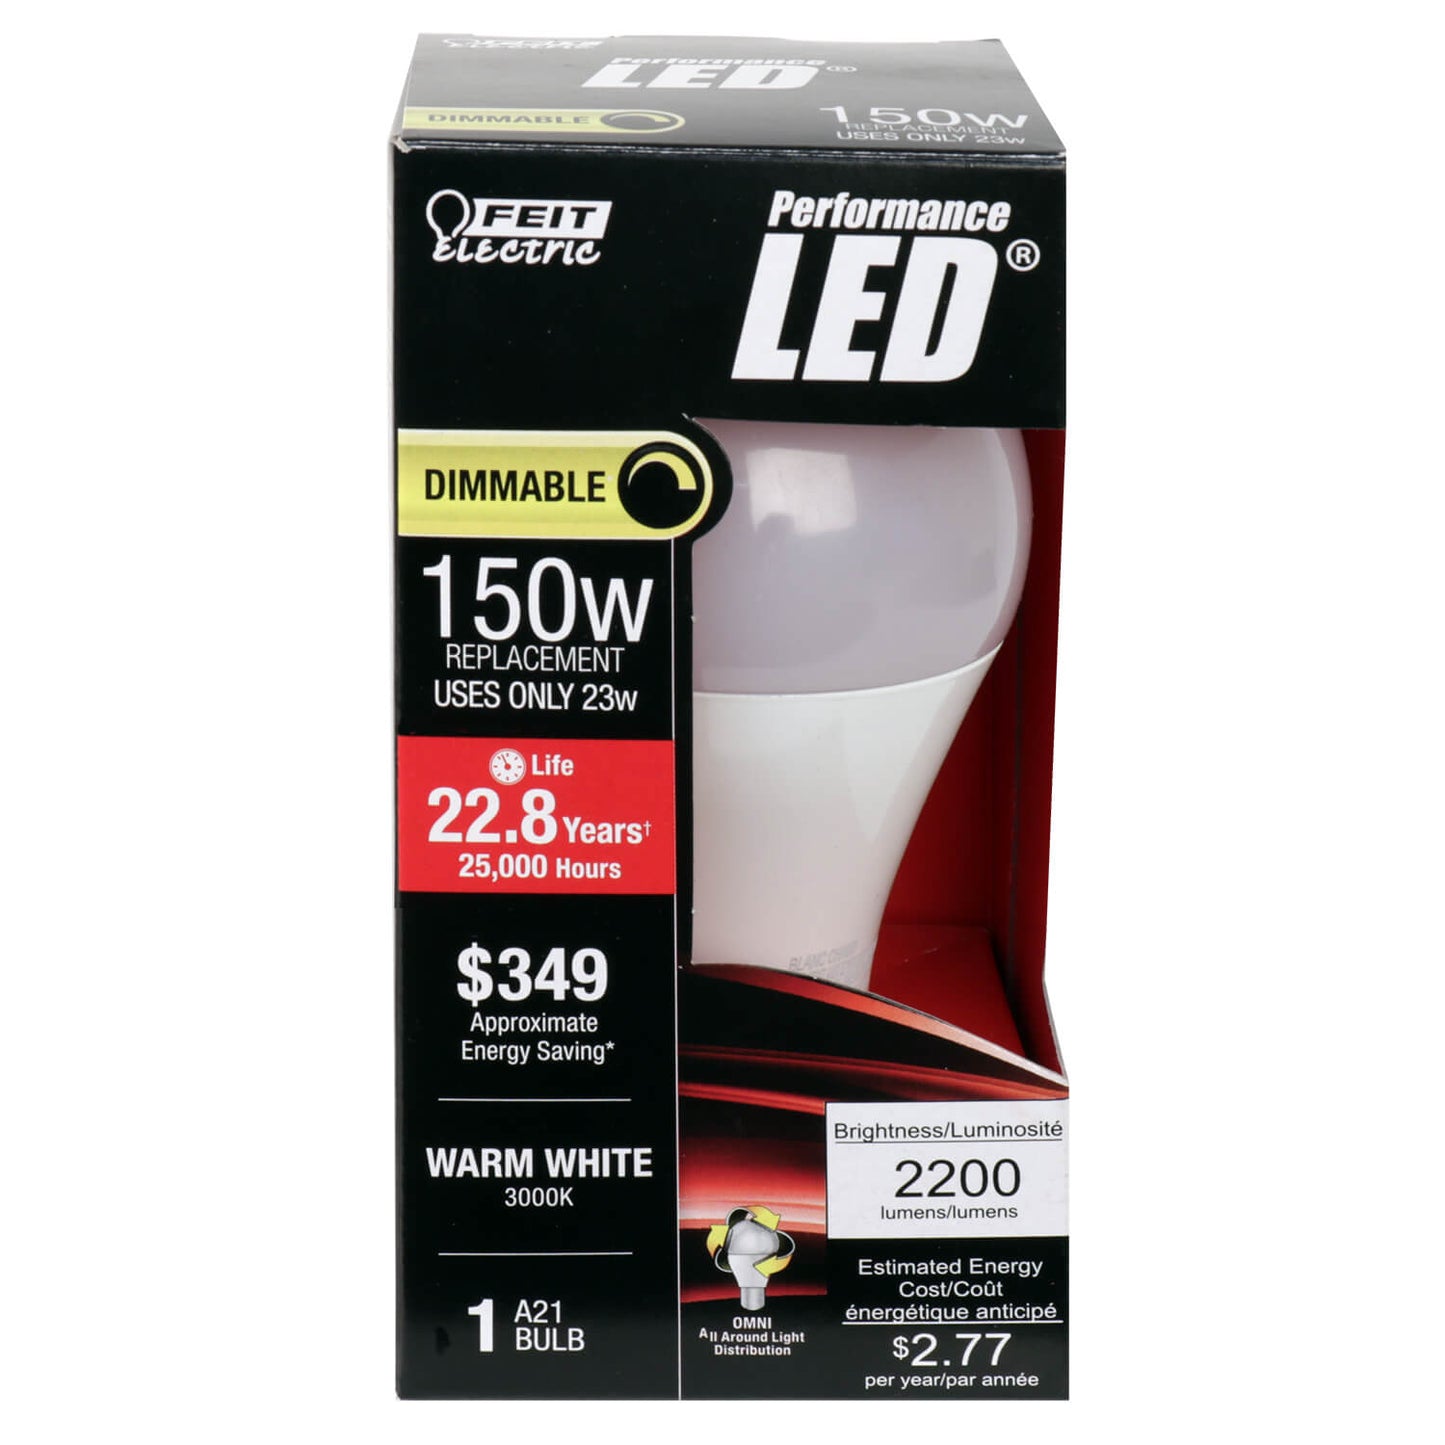 Feit Electric A/OM2200/830/LEDG2- High Lumen A21 LED 150W Equivalent Warm White Dimmable Light Bulb,